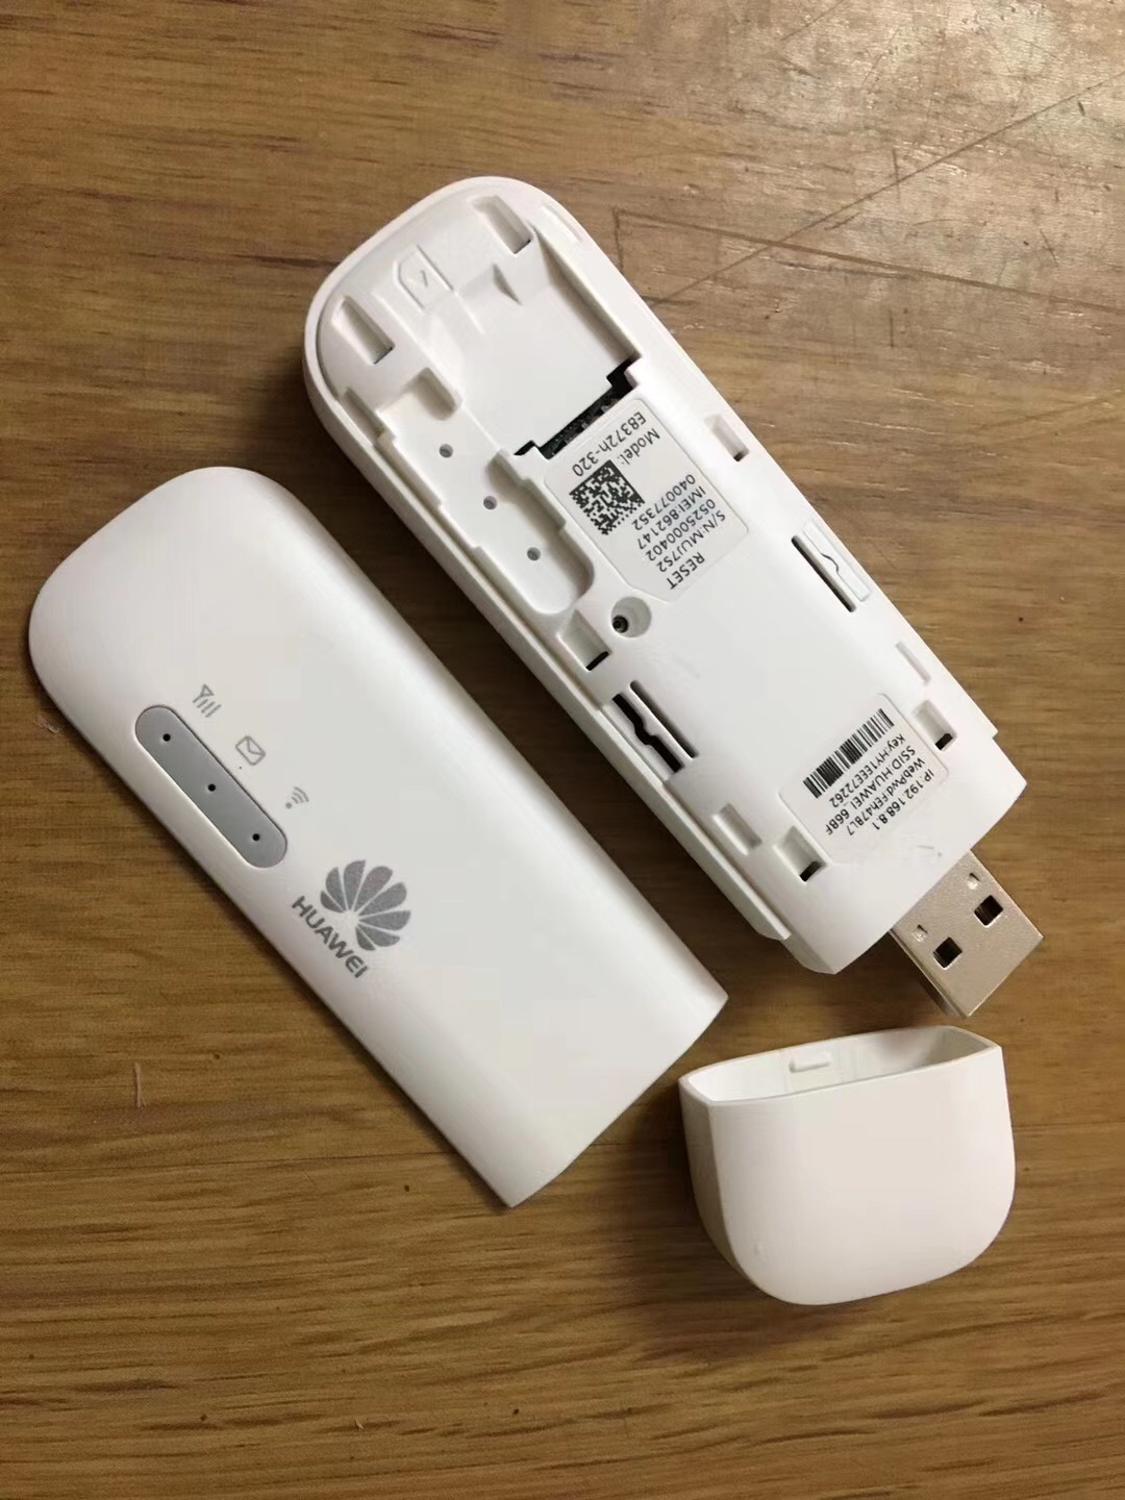 Unlocked HUAWEI E8372h-320 4G LTE USB Modem 150mbps Mobile WIFI Hotspot with SIM card FDD 700 800 850 900 1800 2100 2600MHz